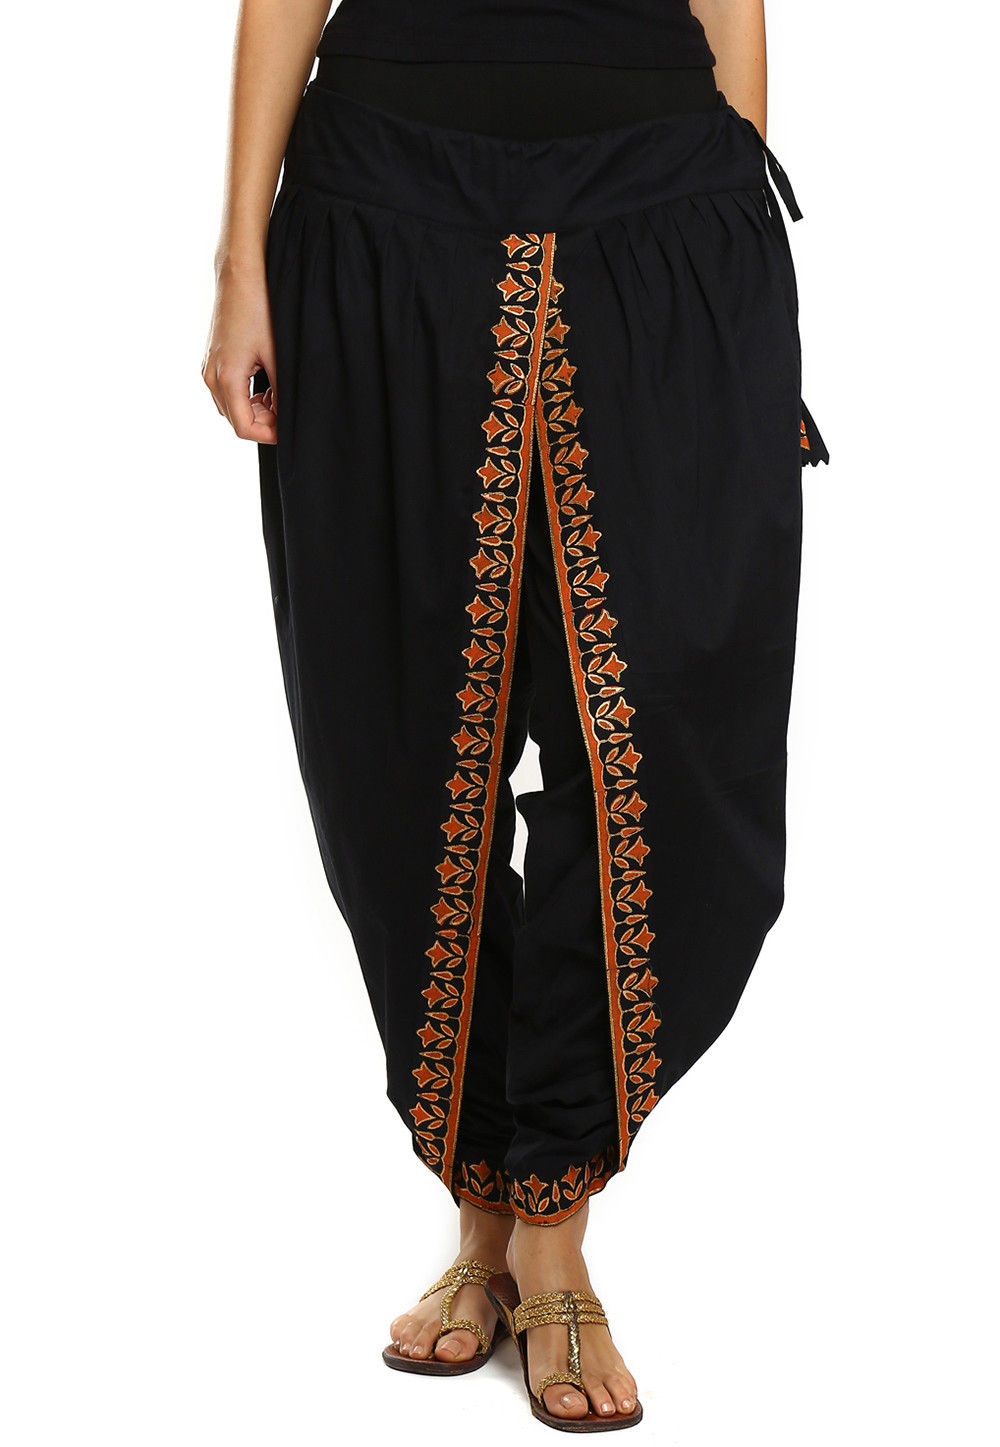 Buy Present Indian Women Dhoti Pants Pleated Harem Patiala Style for Women  India Clothing Free Size (28 Till 34) Printed Dhoti Black Color at Amazon.in